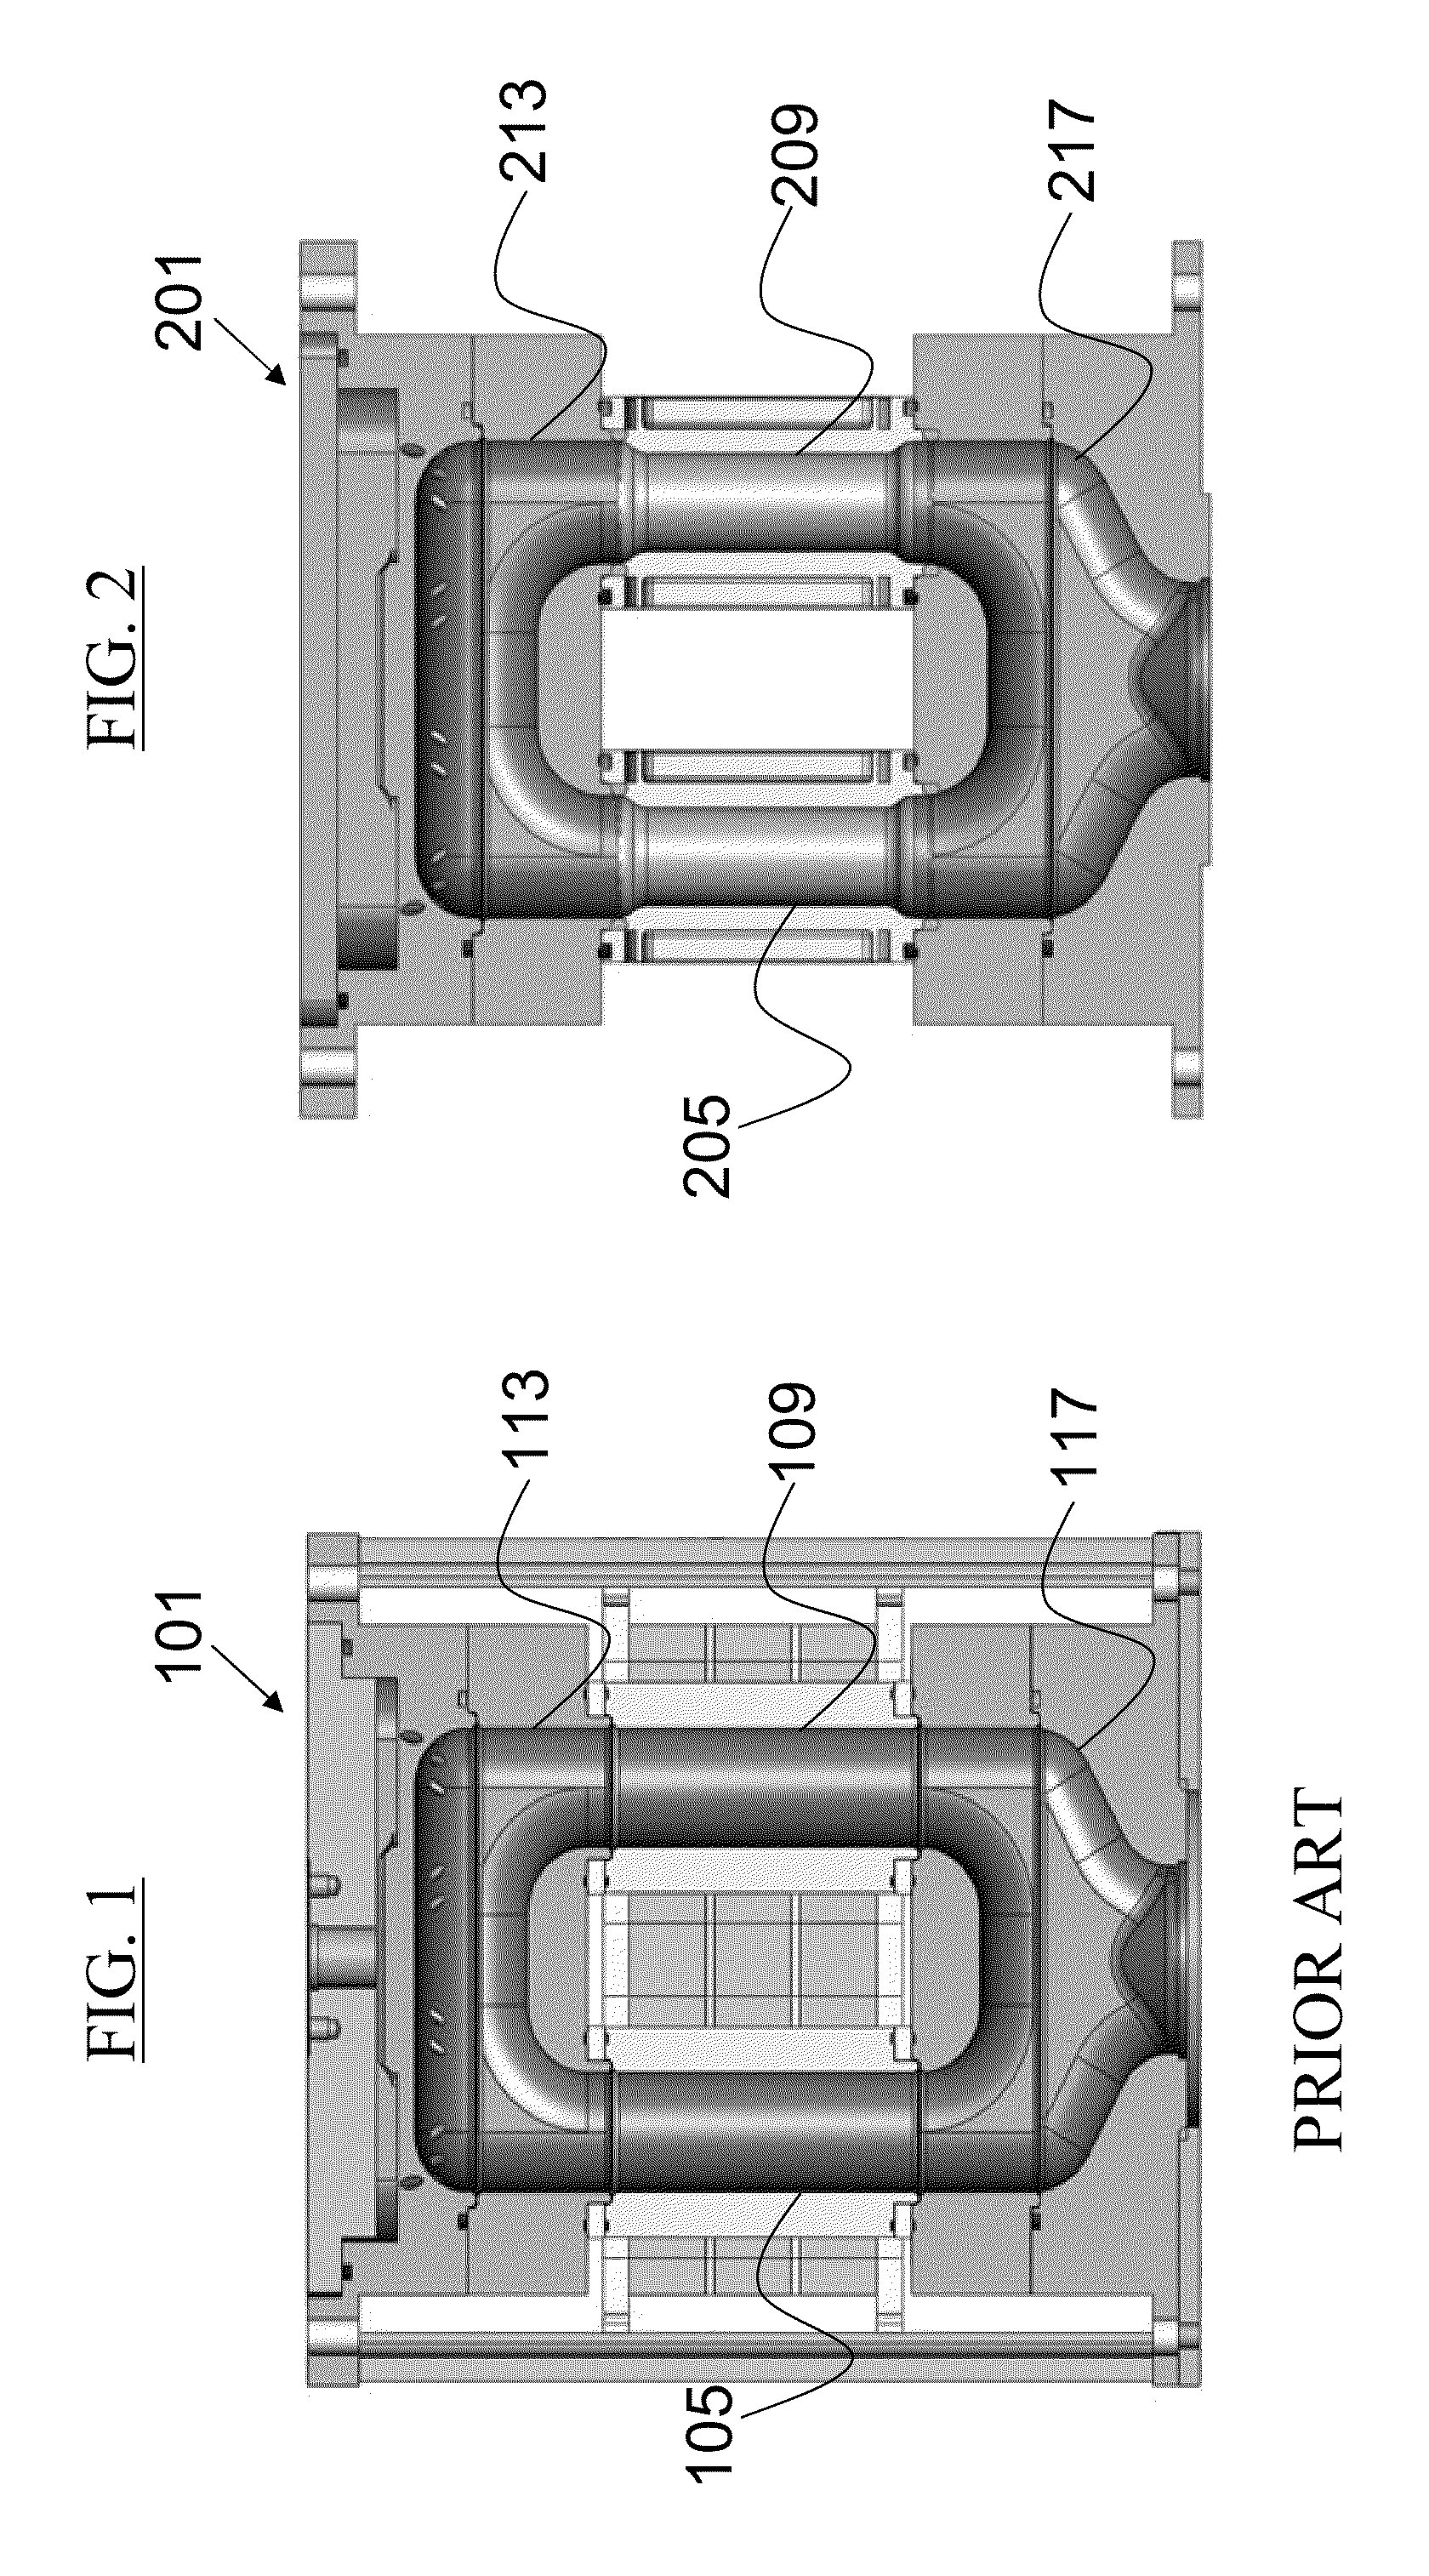 Toroidal Plasma Channel with Varying Cross-Section Areas Along the Channel